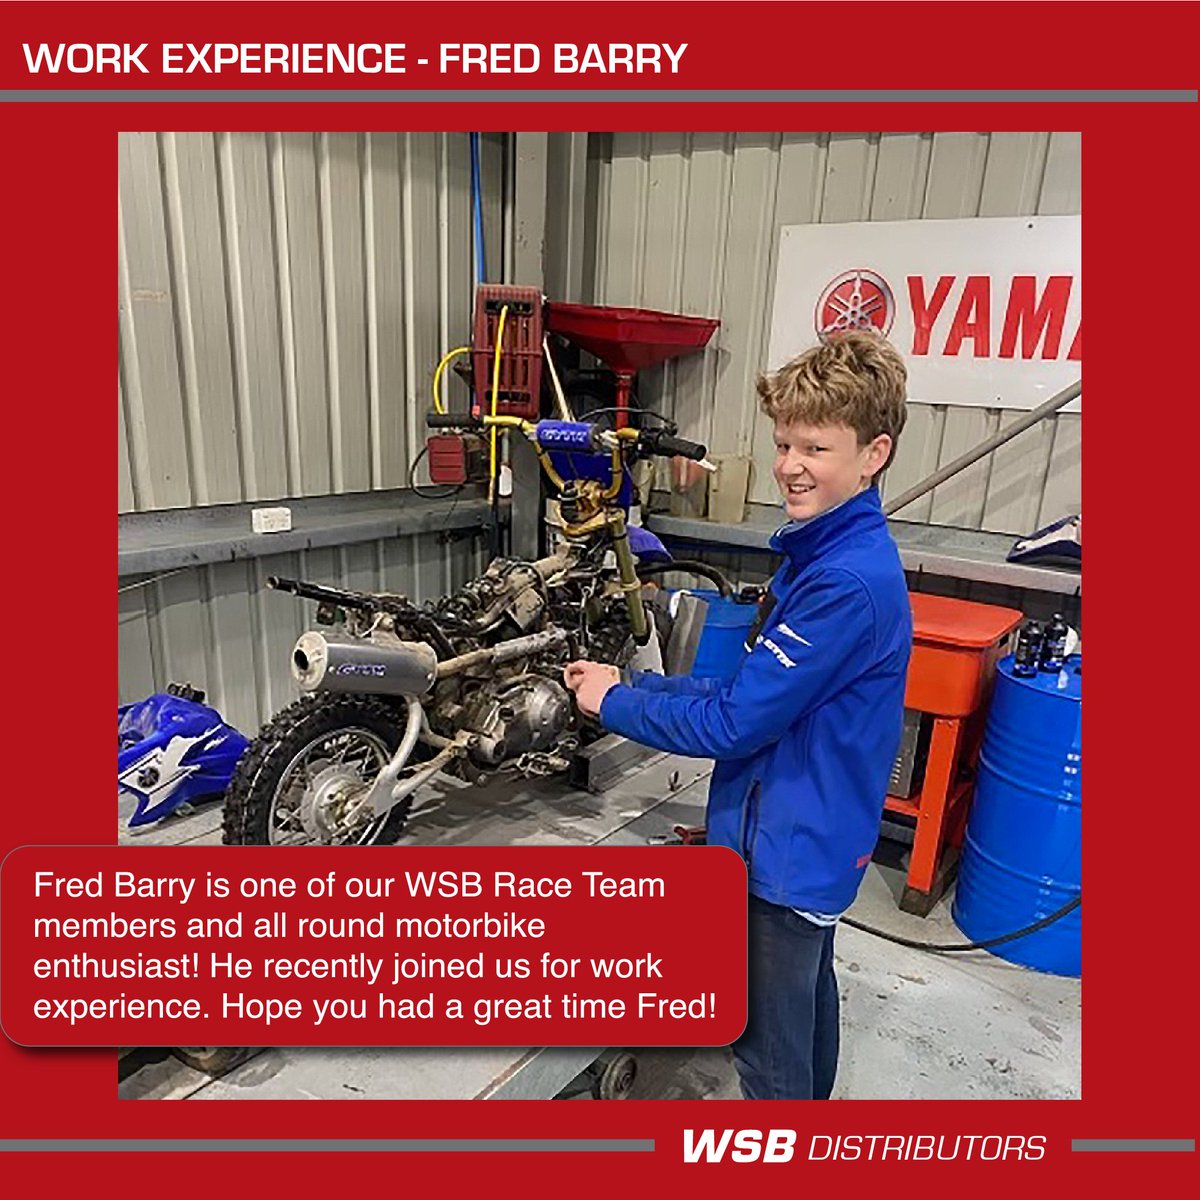 At WSB Distributors we pride ourselves on offering young people opportunities to do work experience. 

#WorkExperience #MotorbikeMechanic #HandsOnLearning #RuralCareerPath #MechanicTraining #AgricultureIndustry #MechanicApprentice #HandsOnEducation #RuralYouth #FarmMechanics